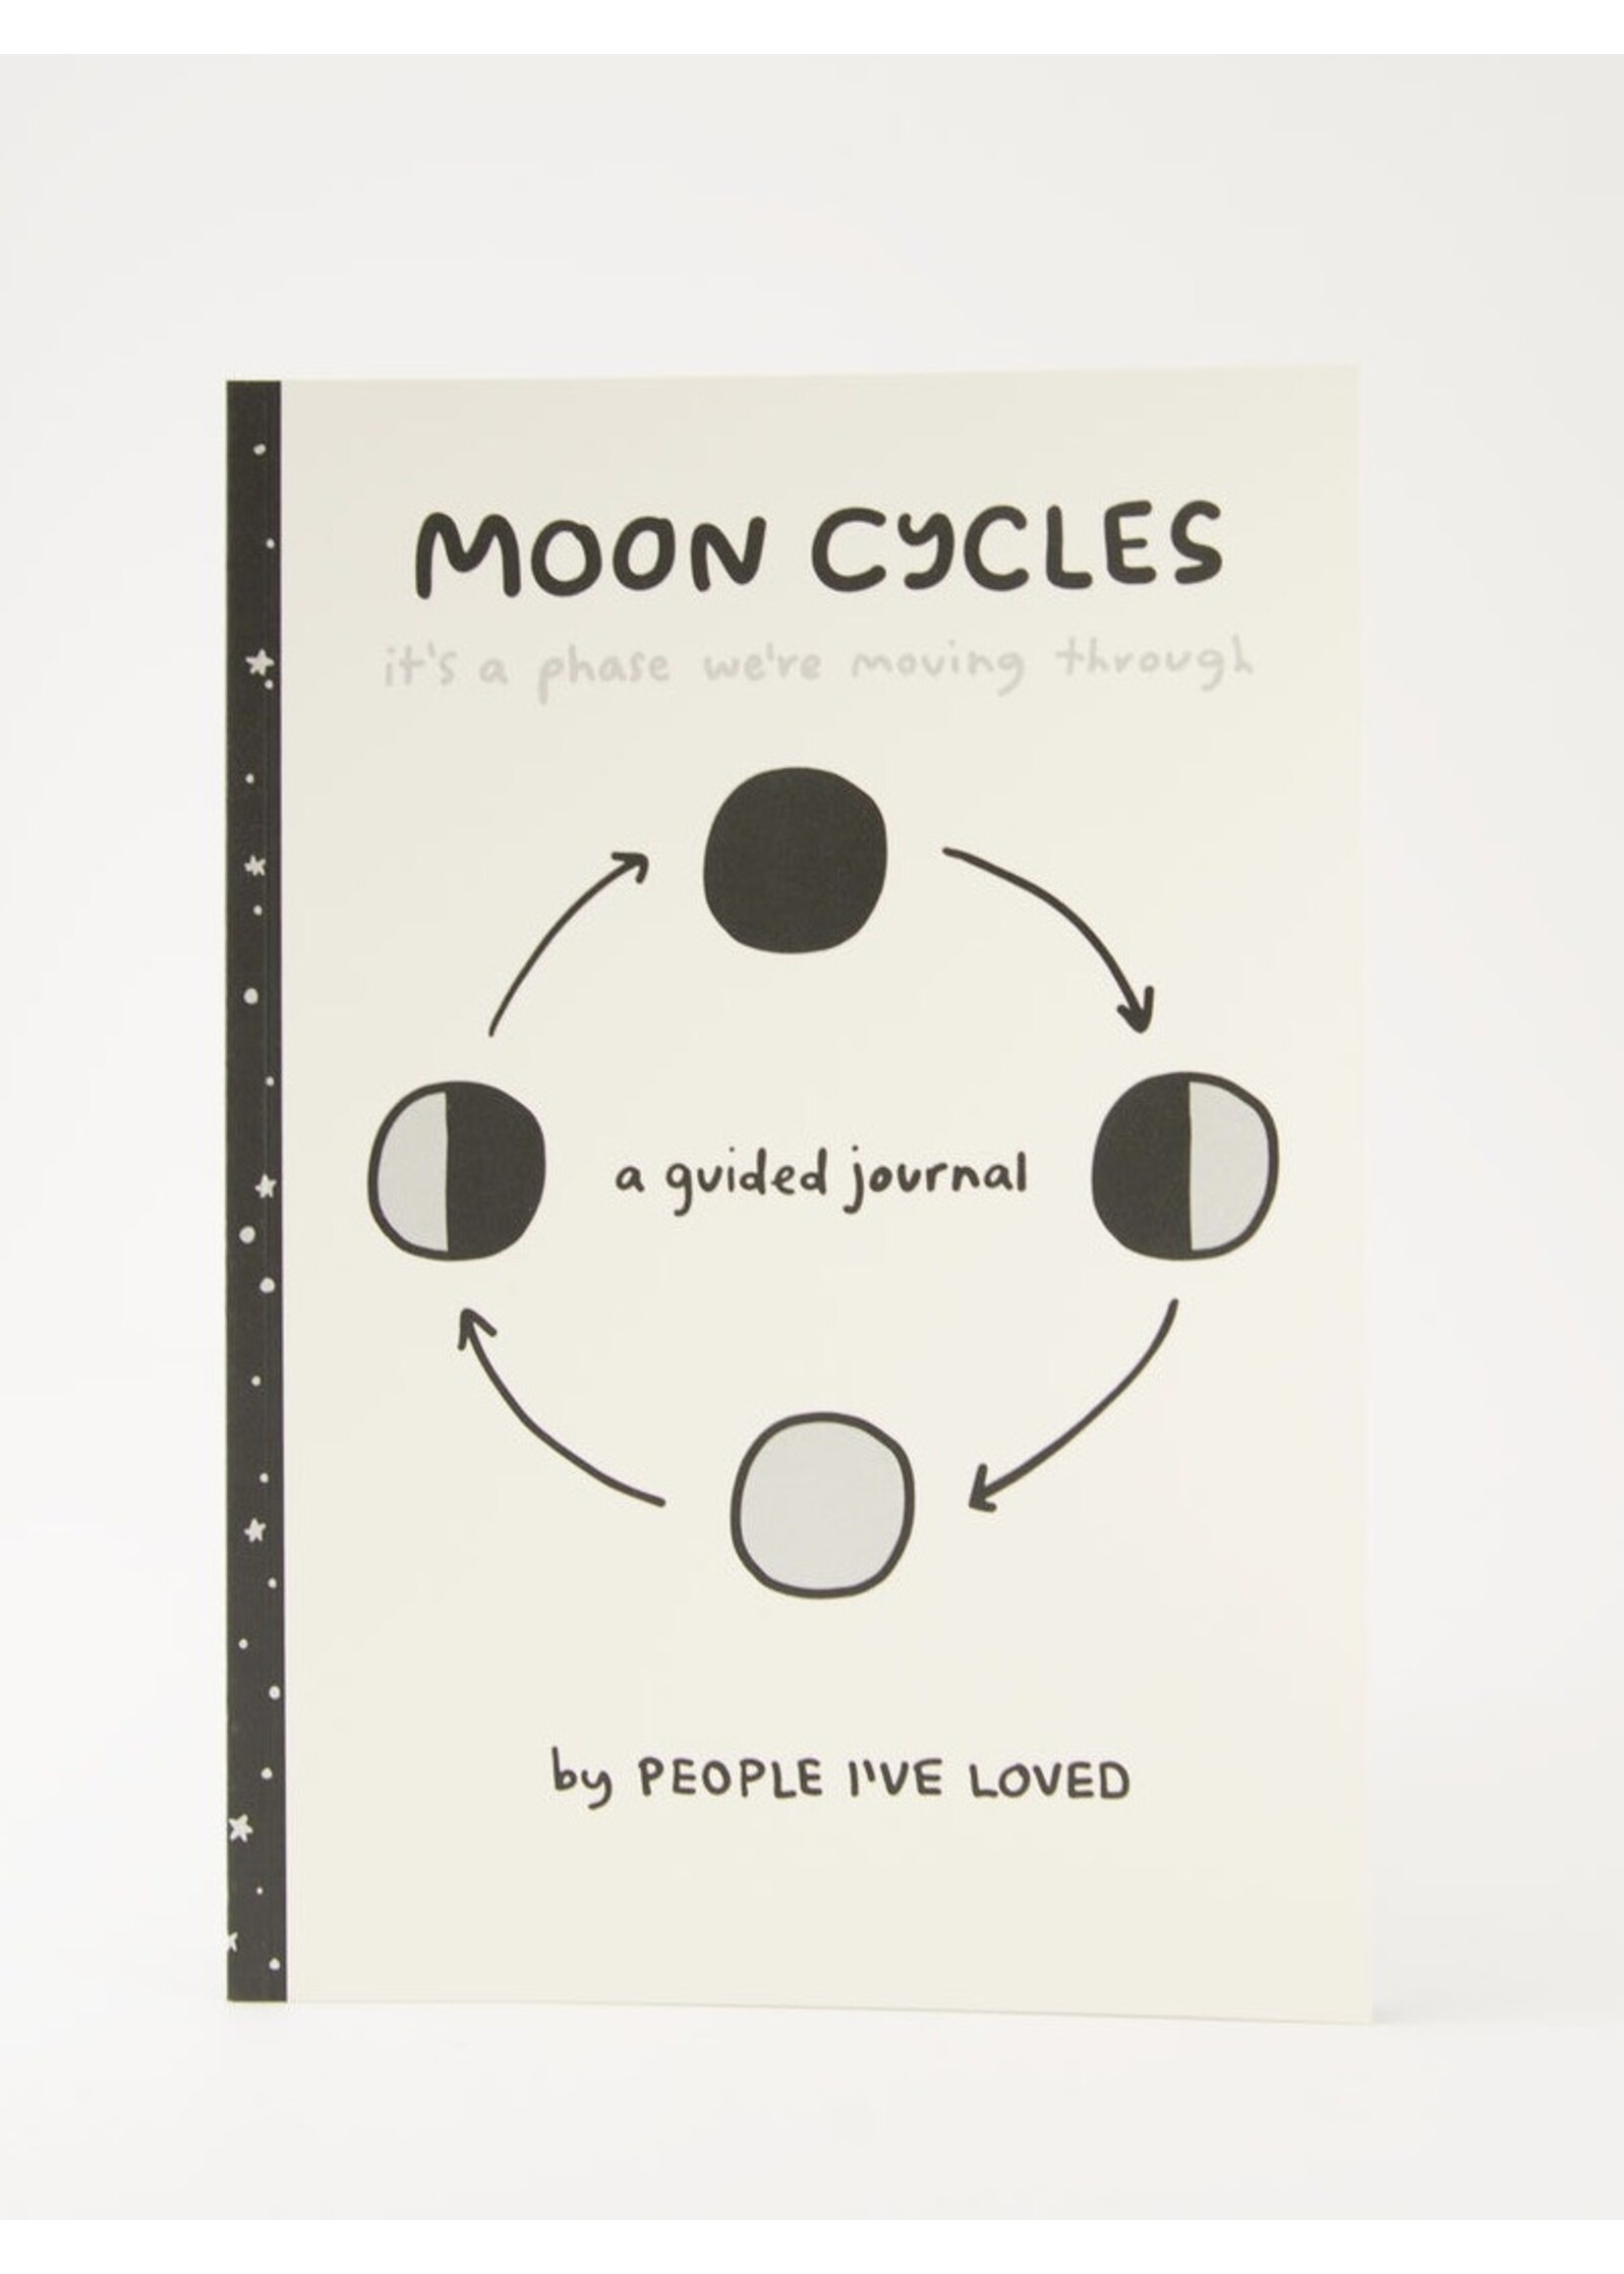 Notebook "Moon Cycles Guided Journal" by People I've Loved